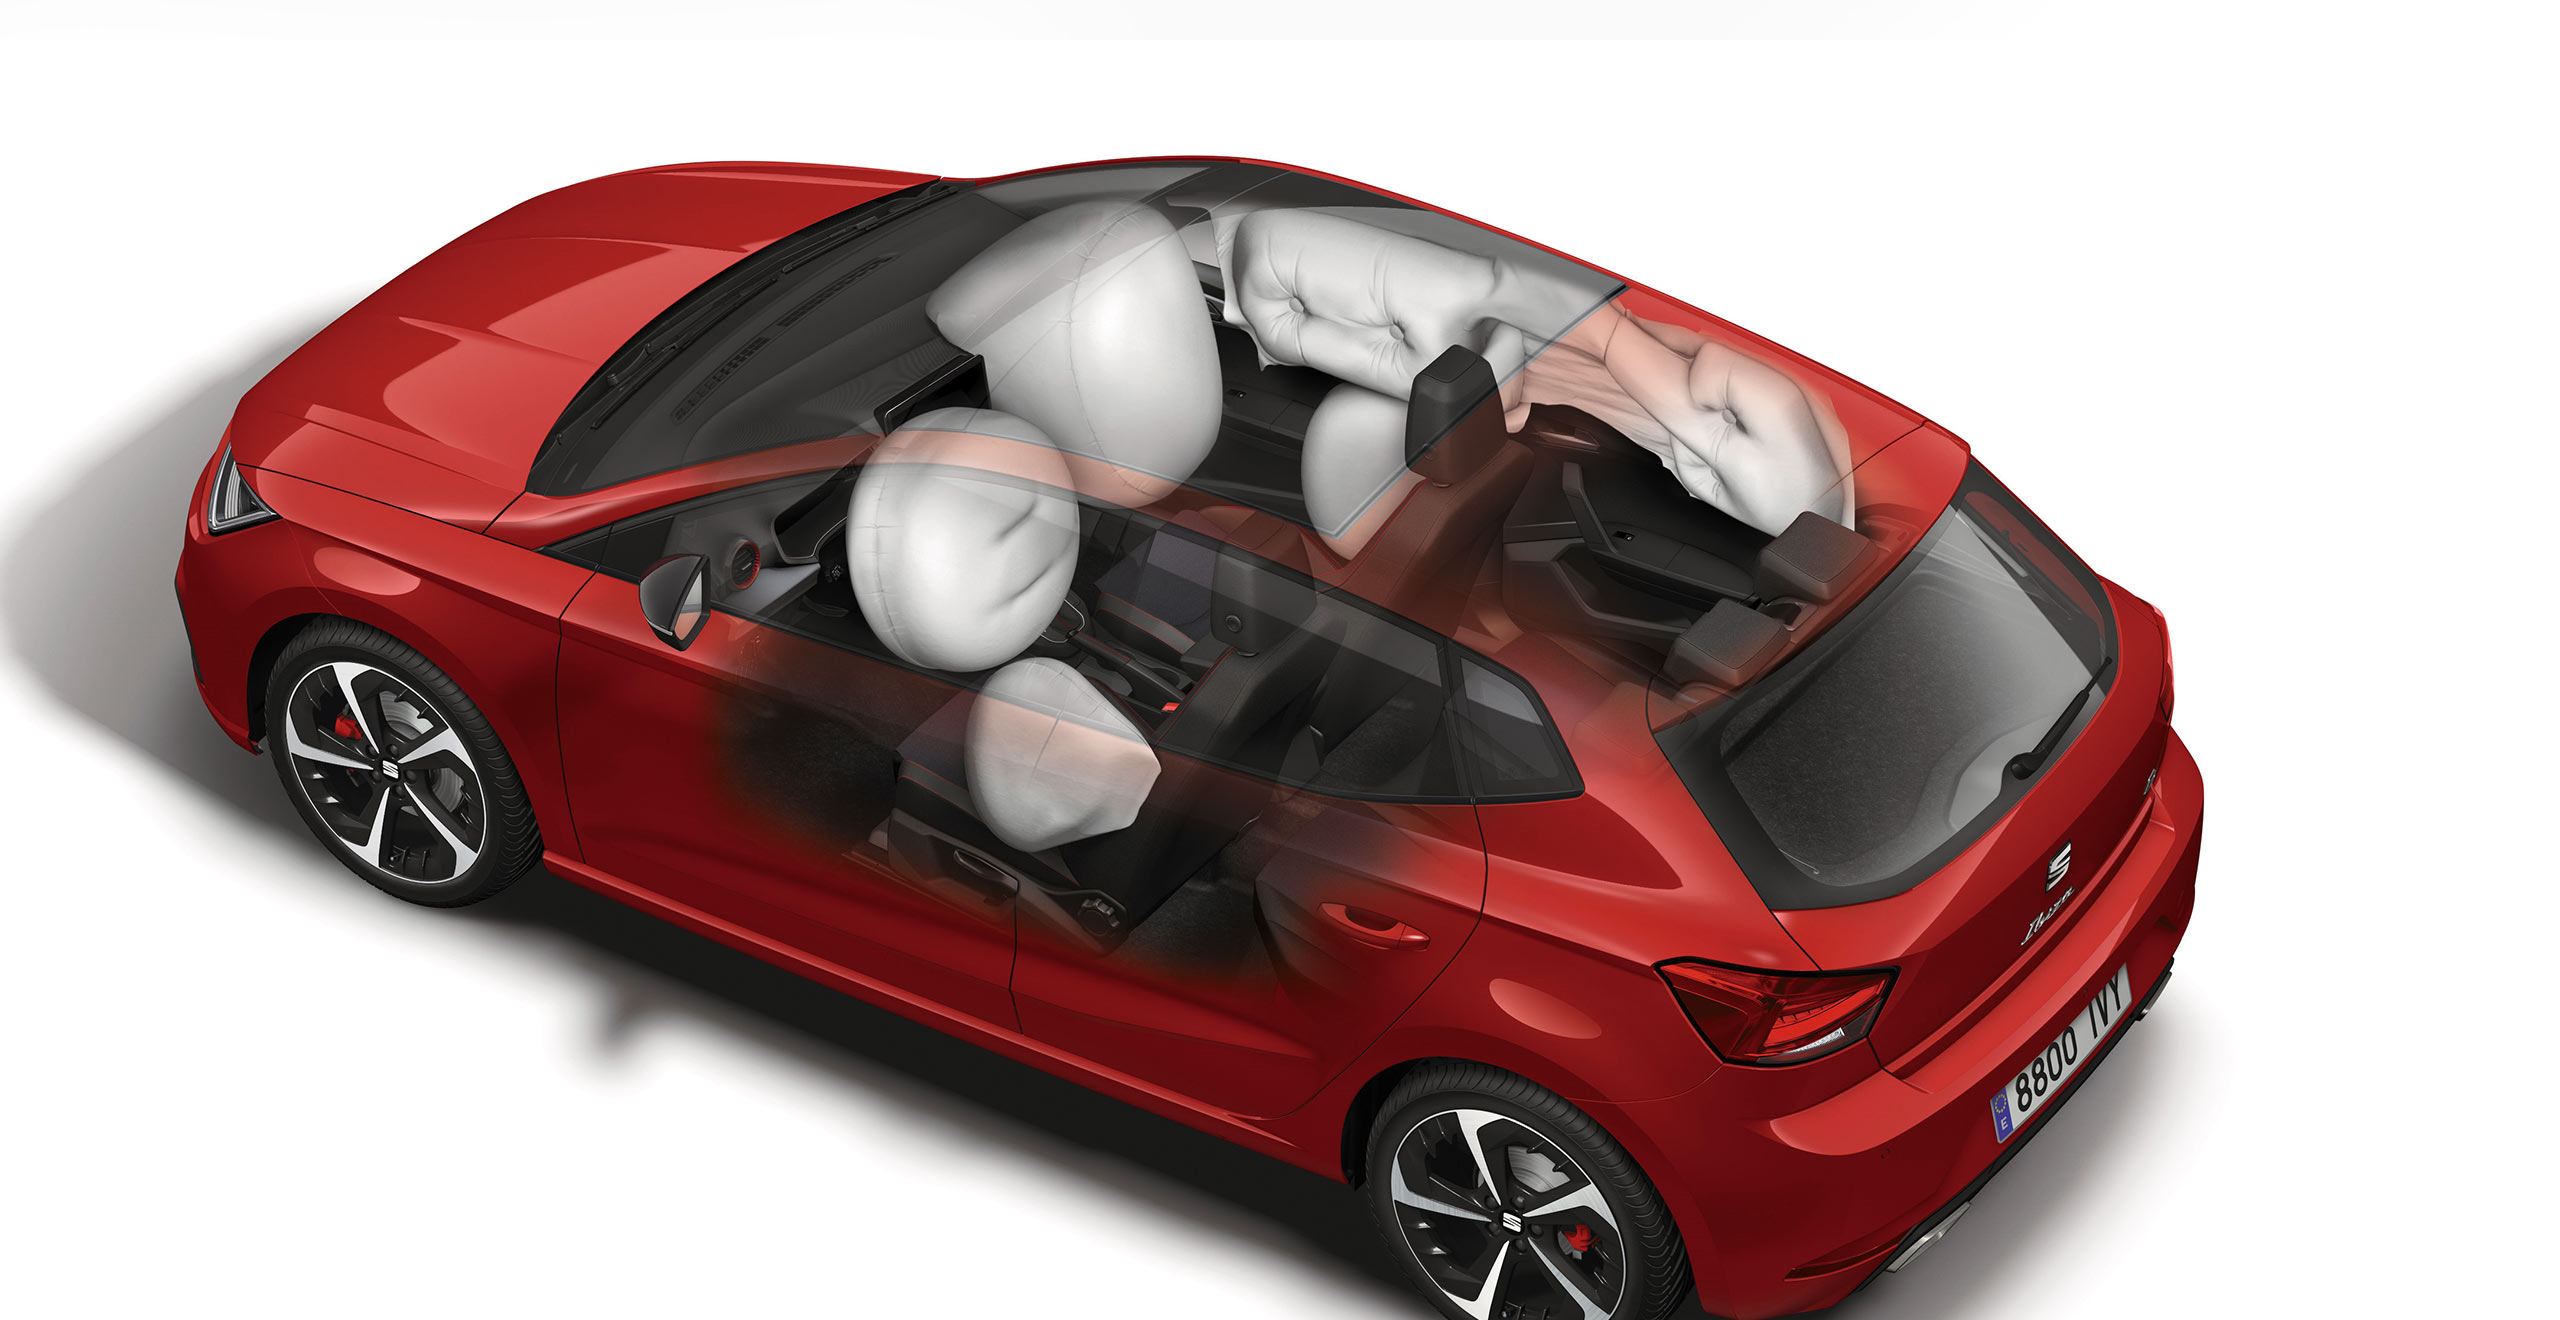 High view of the SEAT Ibiza airbags 